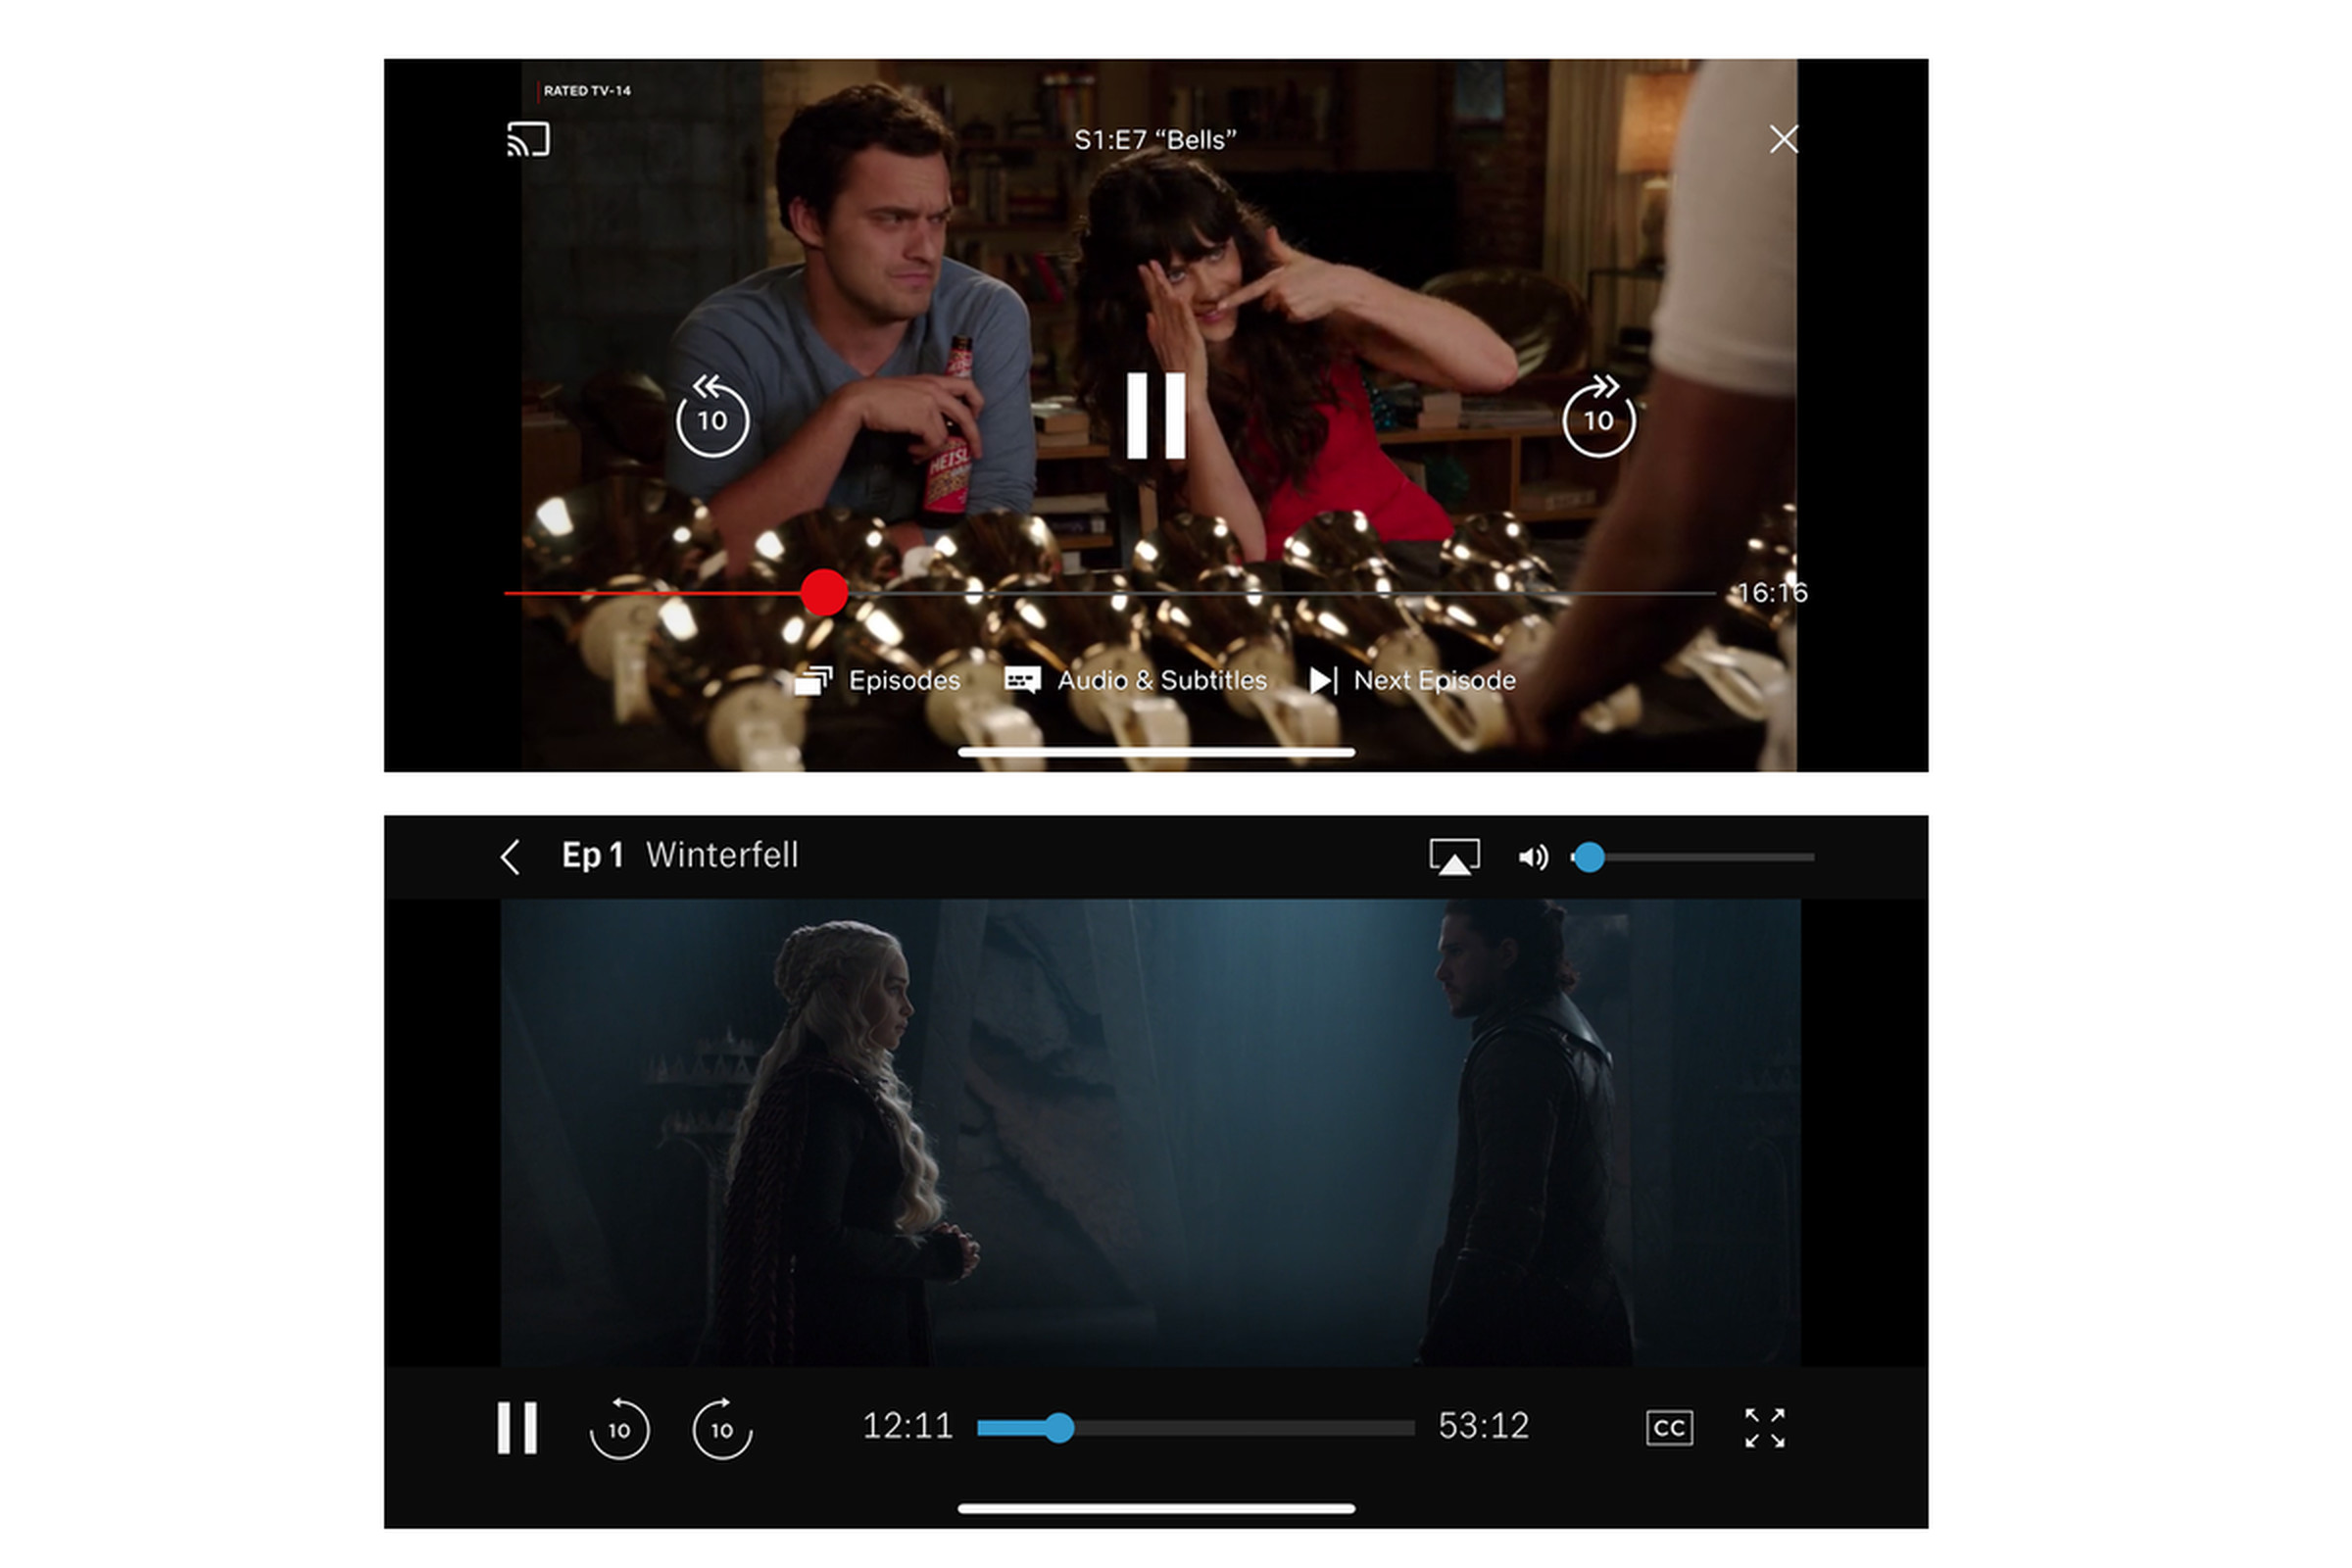 Default playback on Netflix and HBO’s iOS apps (content has been edited back into screenshots)